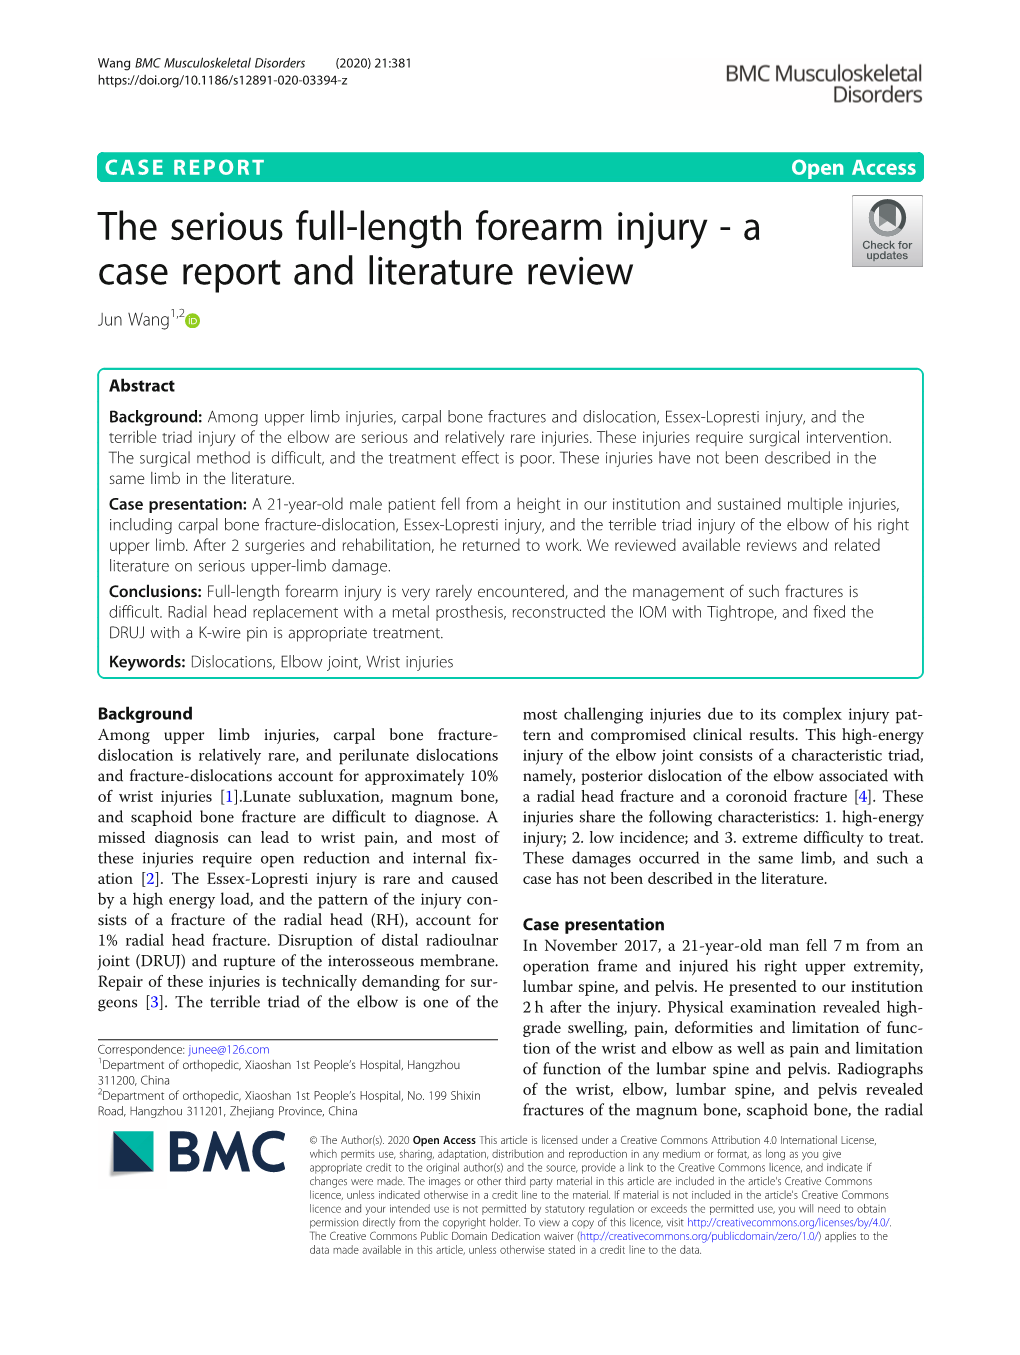 The Serious Full-Length Forearm Injury - a Case Report and Literature Review Jun Wang1,2